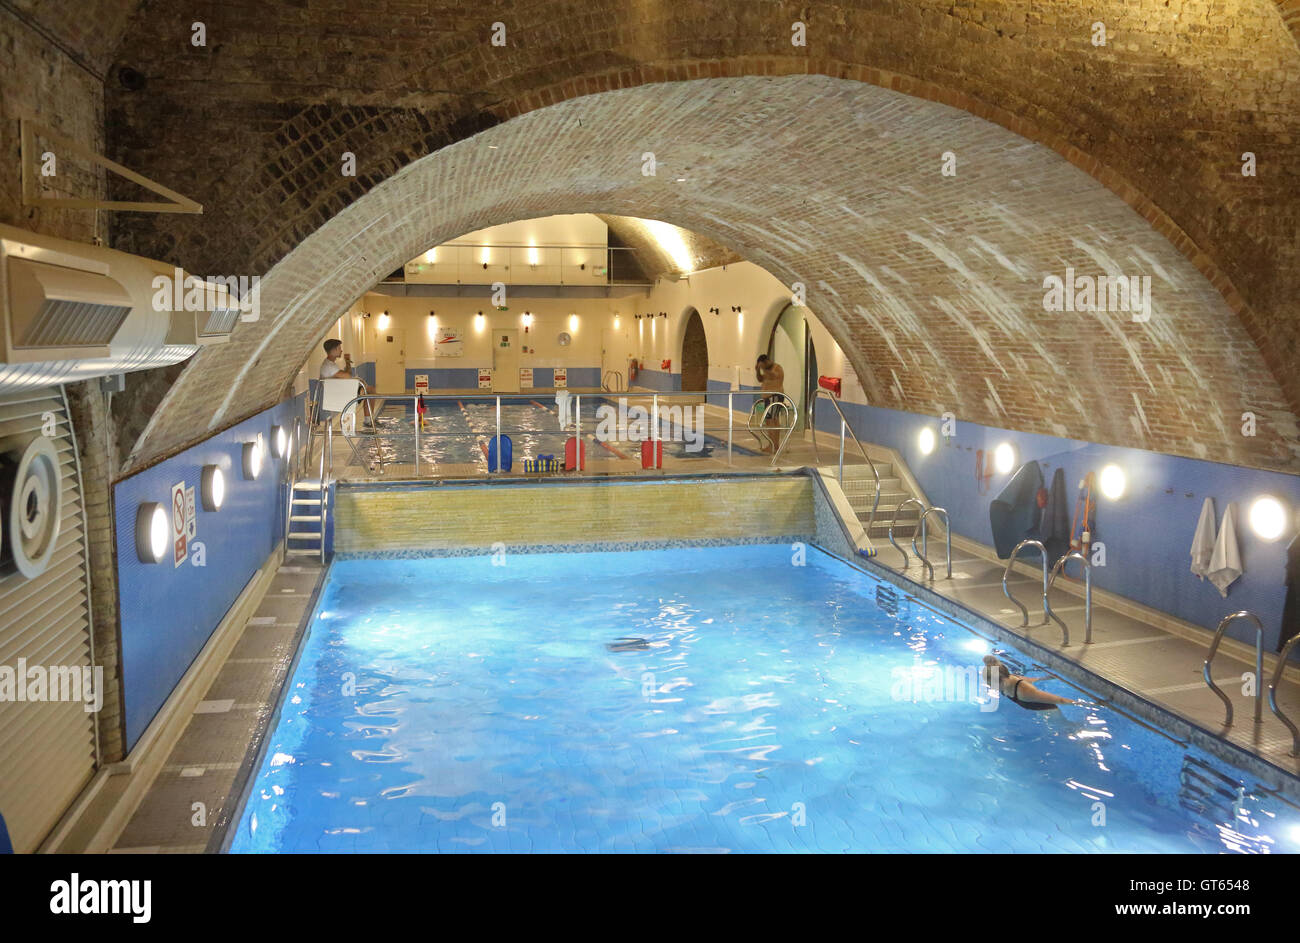 Swimming pool in the Nuffield Fitness Centre located in Victorian railway arches beneath London's Cannon Street Station Stock Photo